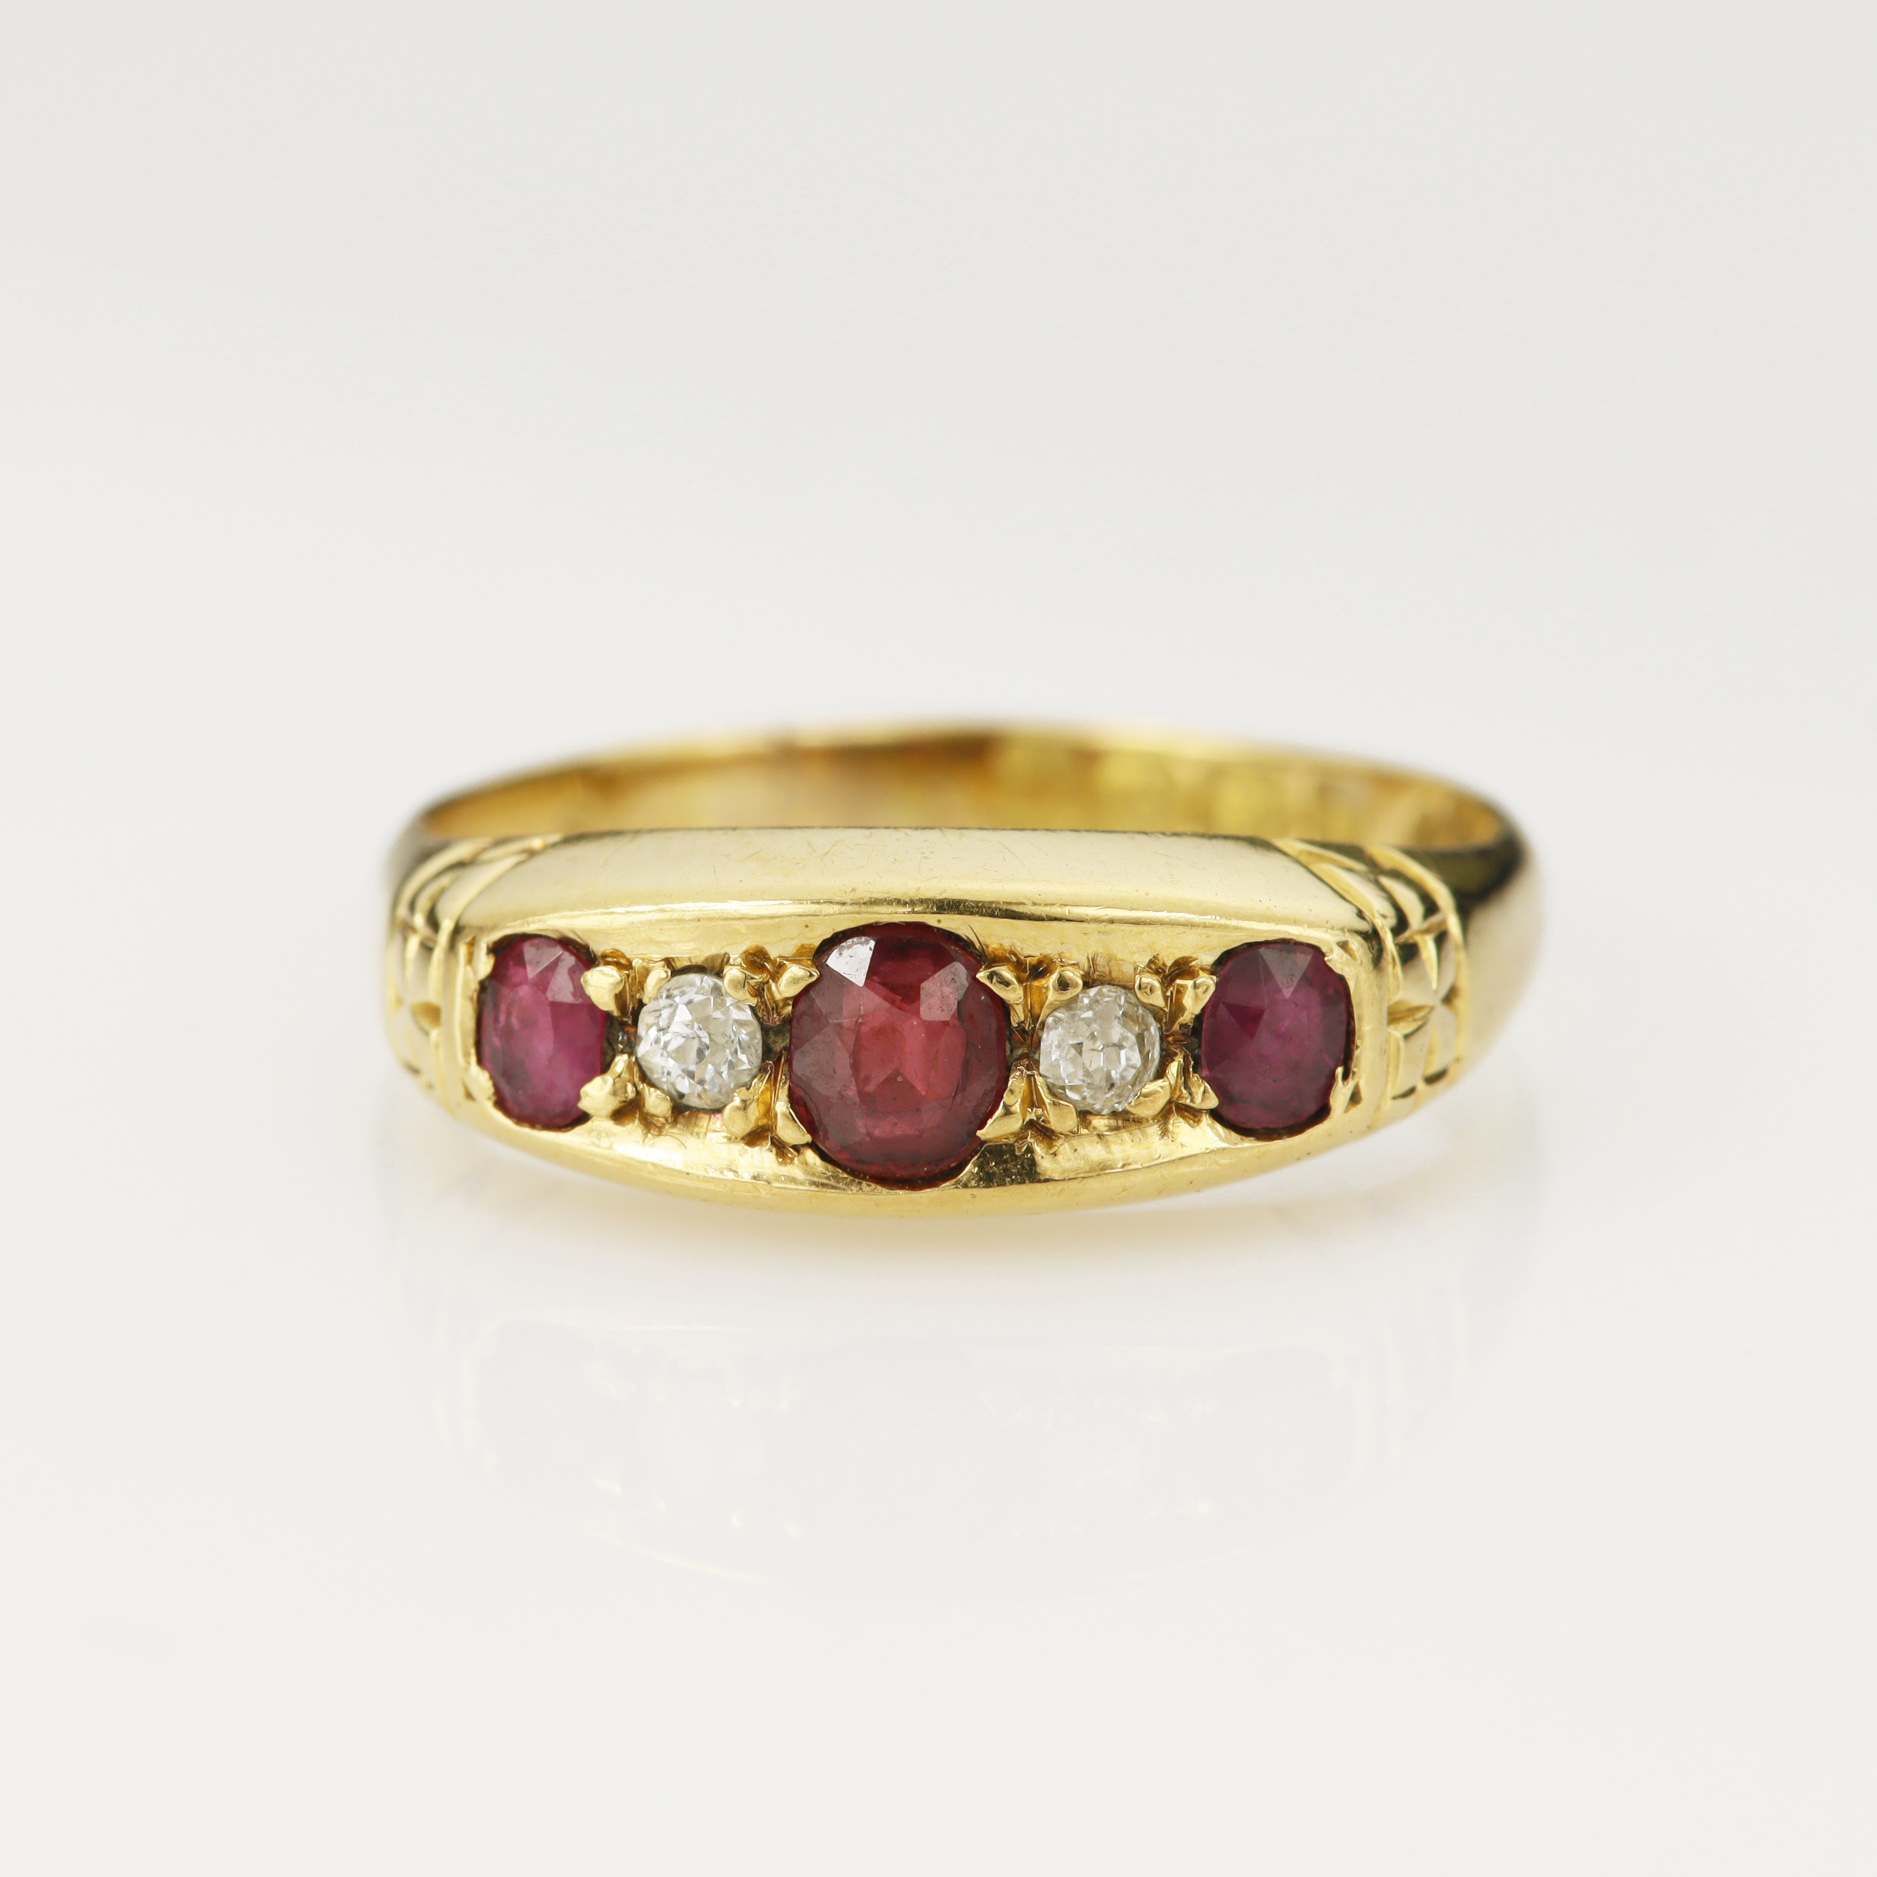 18ct yellow gold Edwardian ruby and diamond ring, set with three graduating oval mix cut rubies